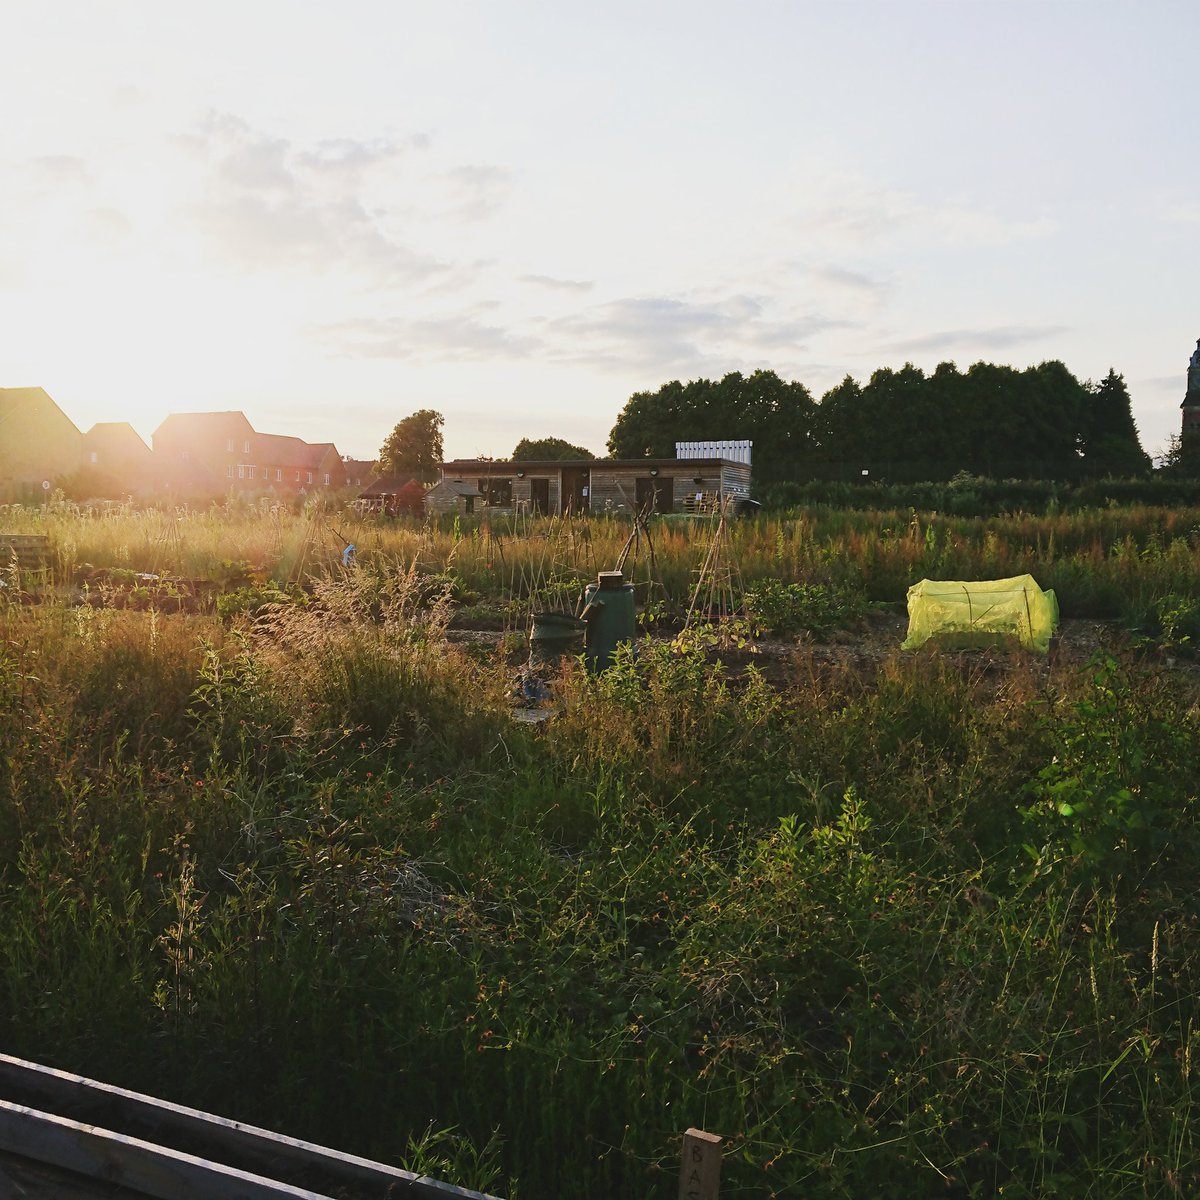 Nothing like watching the sunset over a freshly watered allotment

#gardening #allotmentlife #allotment #allotmentgarden #allotmentlove #growth #gyo